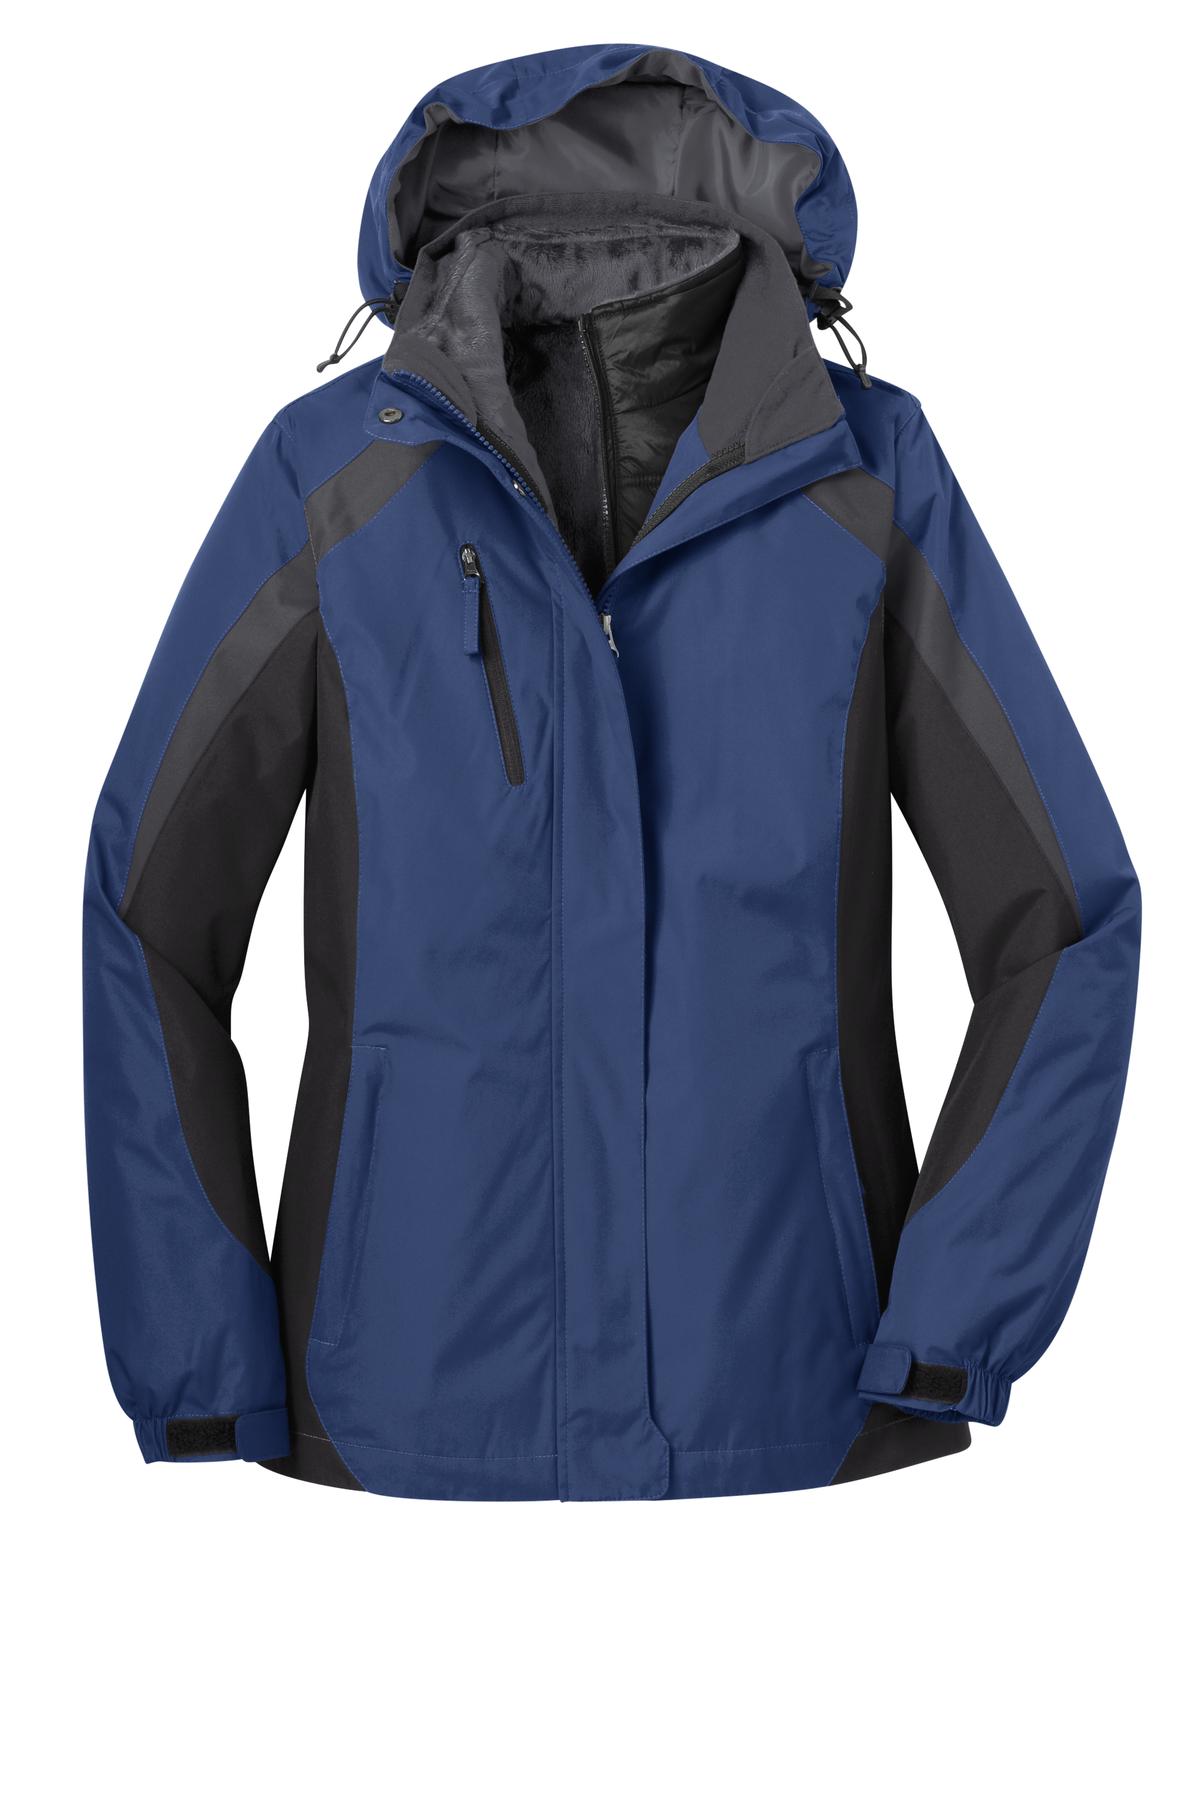 Port Authority Ladies Colorblock 3 in 1 Jacket-S (Admiral Blue/ Black/ Magnet Grey) - image 5 of 5